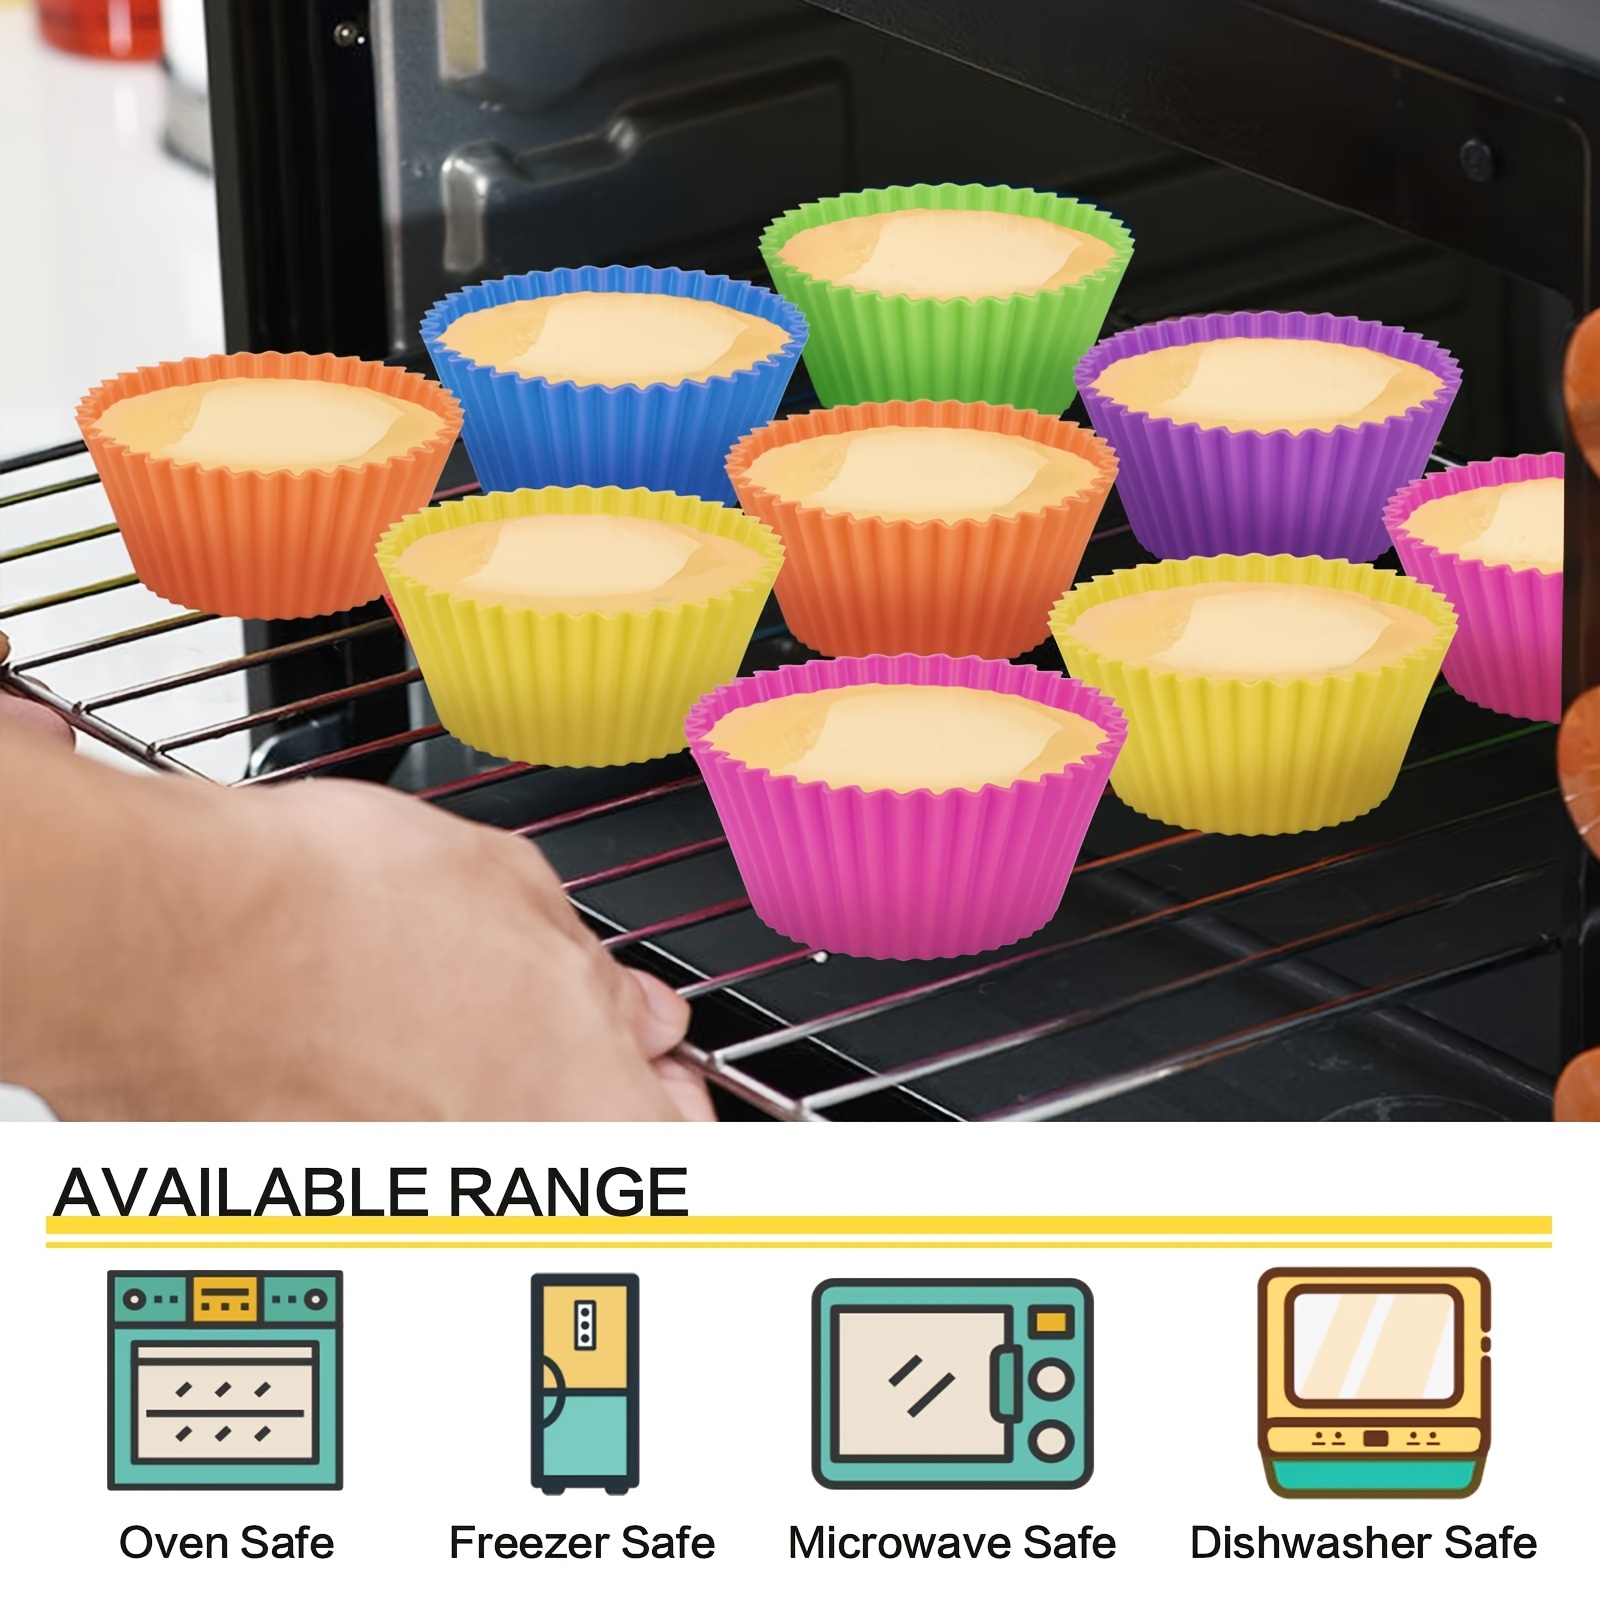  12 Silicone Cupcake Baking Cups - Comes With A Unique